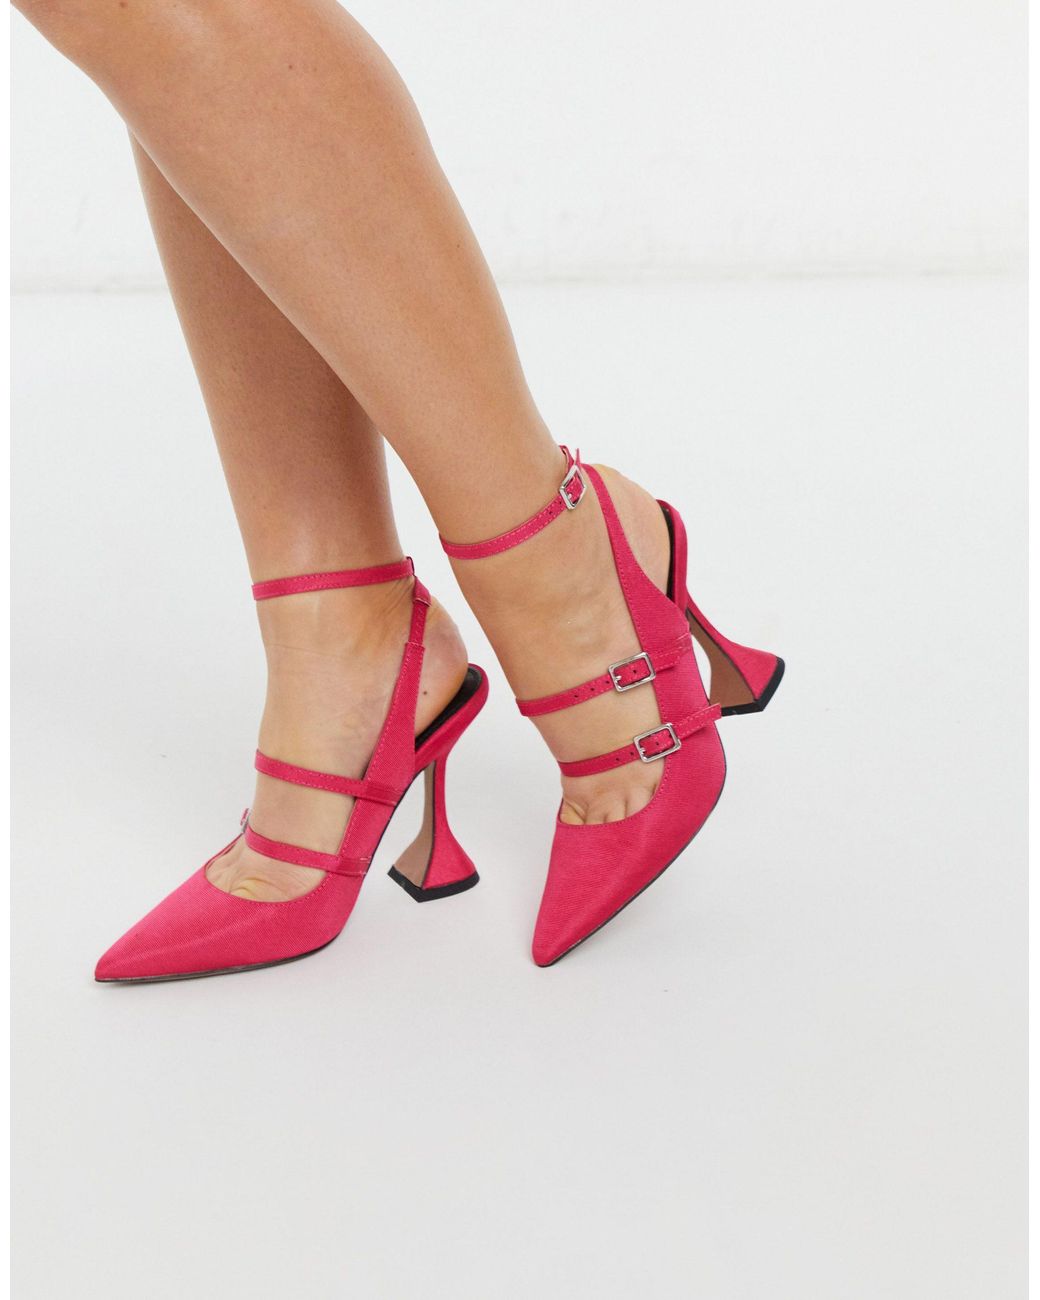 ASOS Parry Multi Buckle High Heeled Shoes in Pink - Lyst